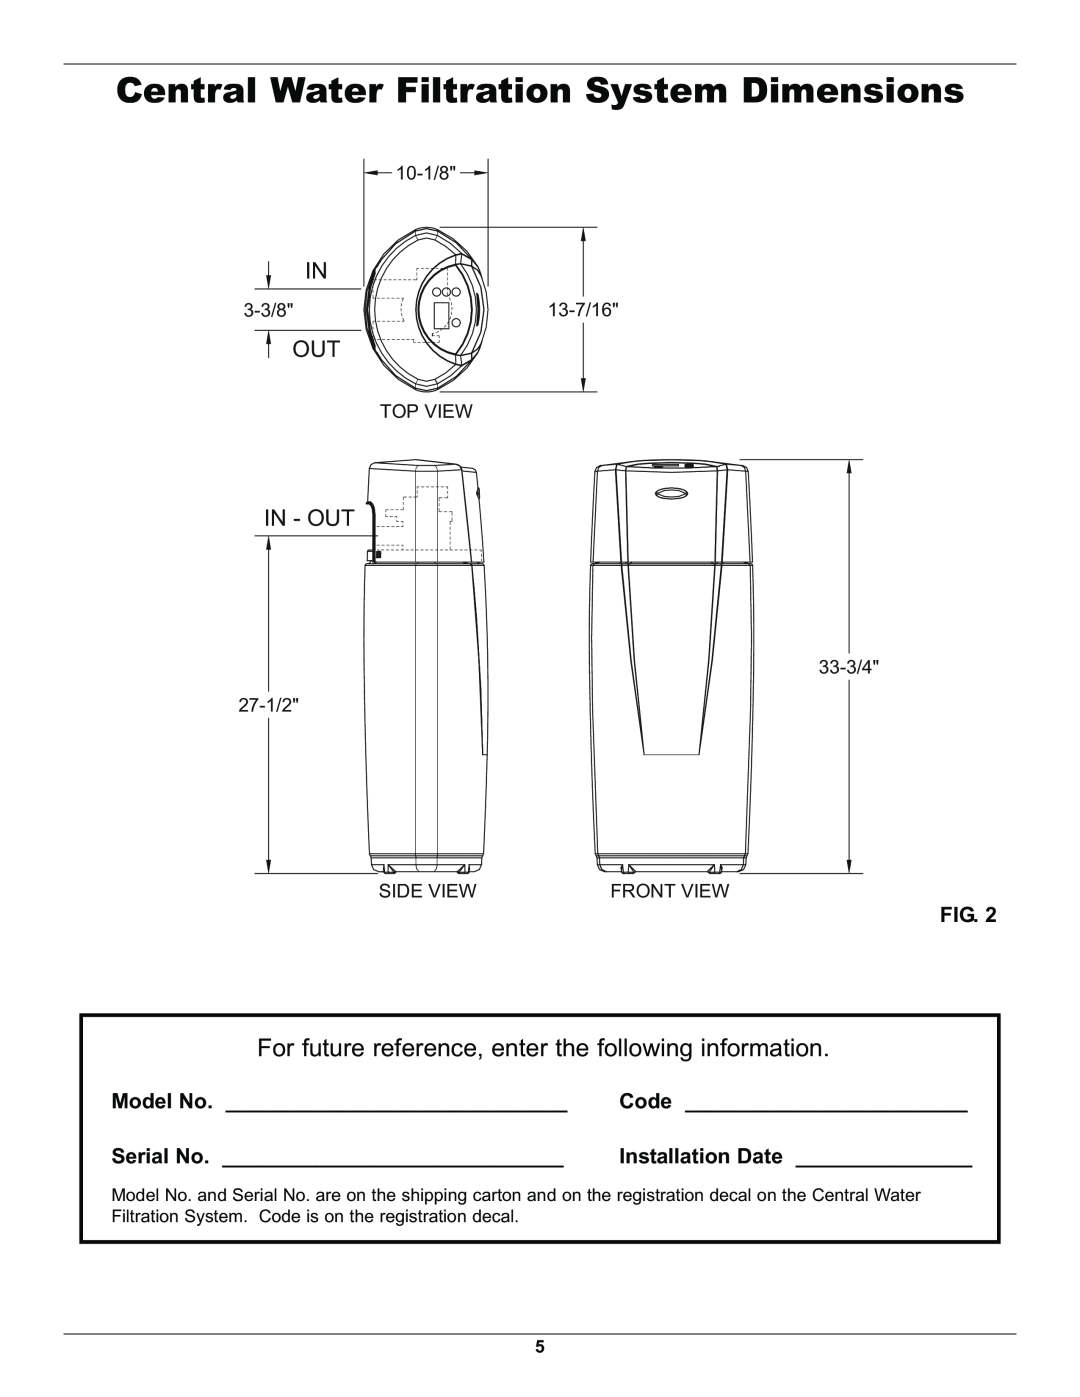 Whirlpool WHELJ1 manual Central Water Filtration System Dimensions, Model No, Code, Serial No, Installation Date, In - Out 